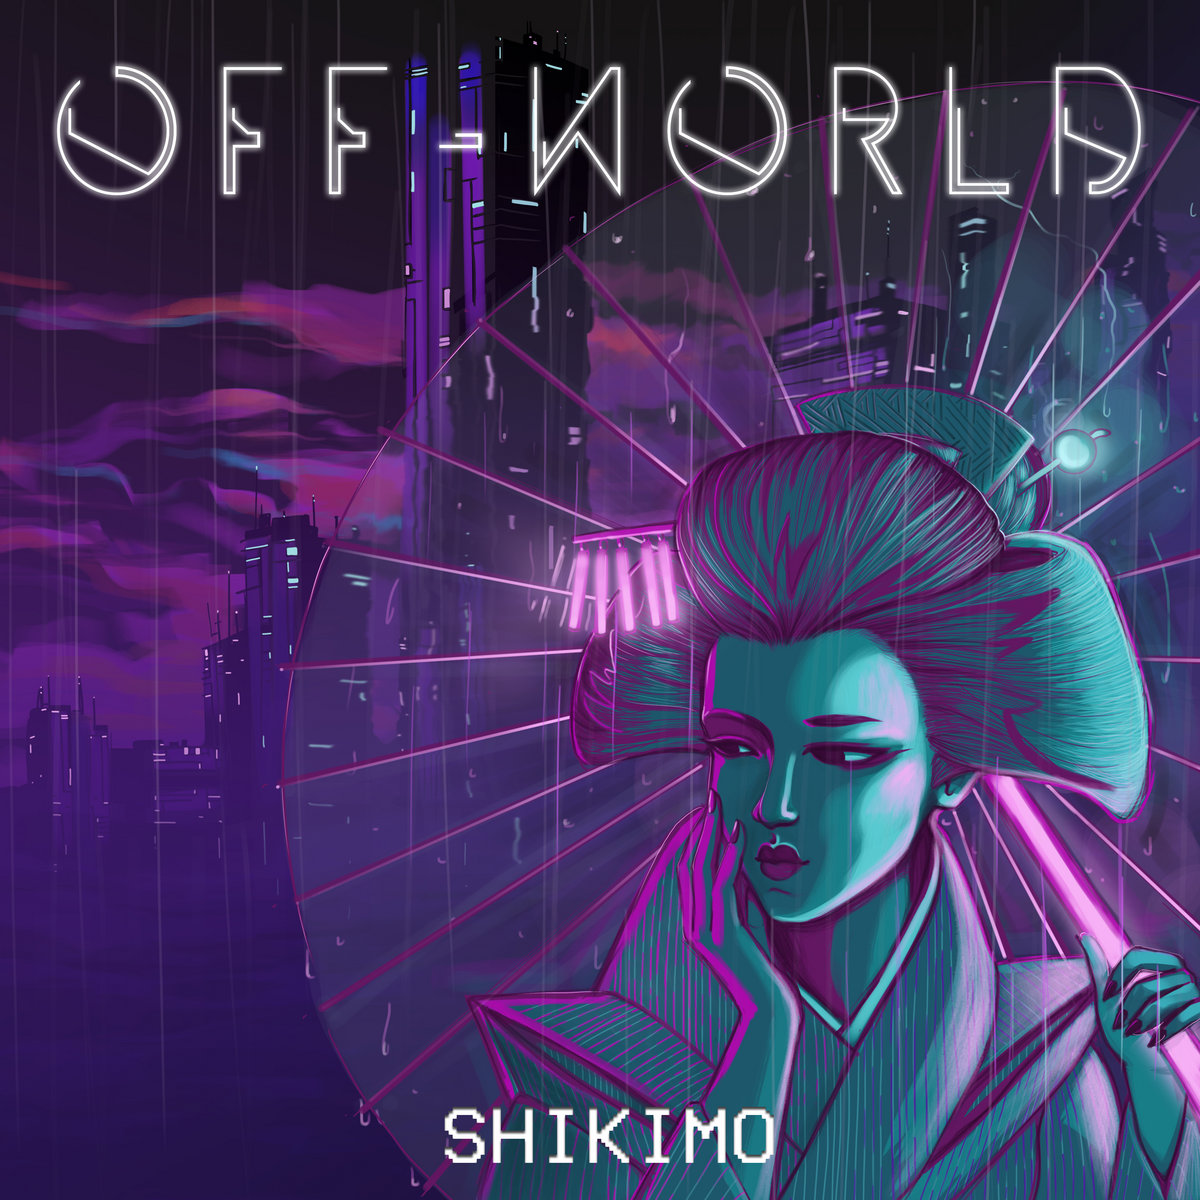 Interview with Shikimo